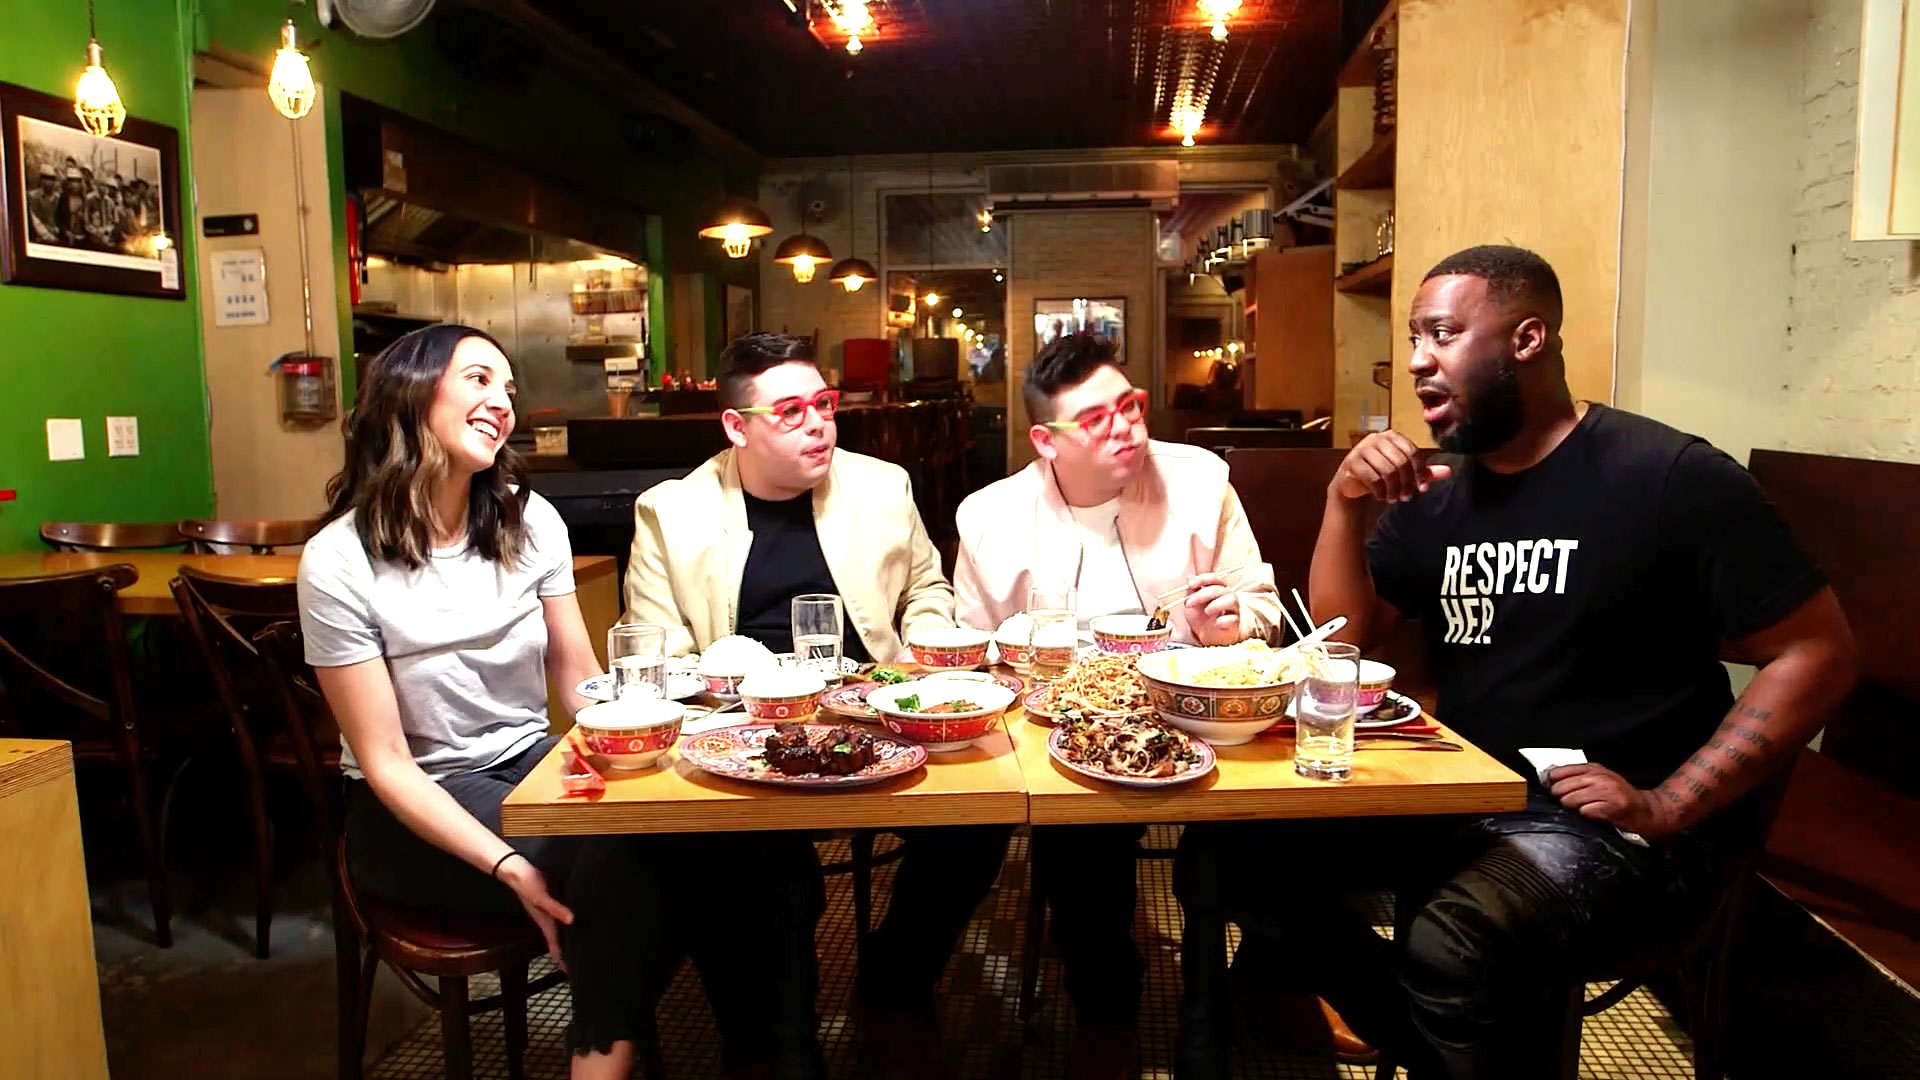 Recording Producer Robert Glasper Has Found His Culinary Match in Chef Leah Cohen